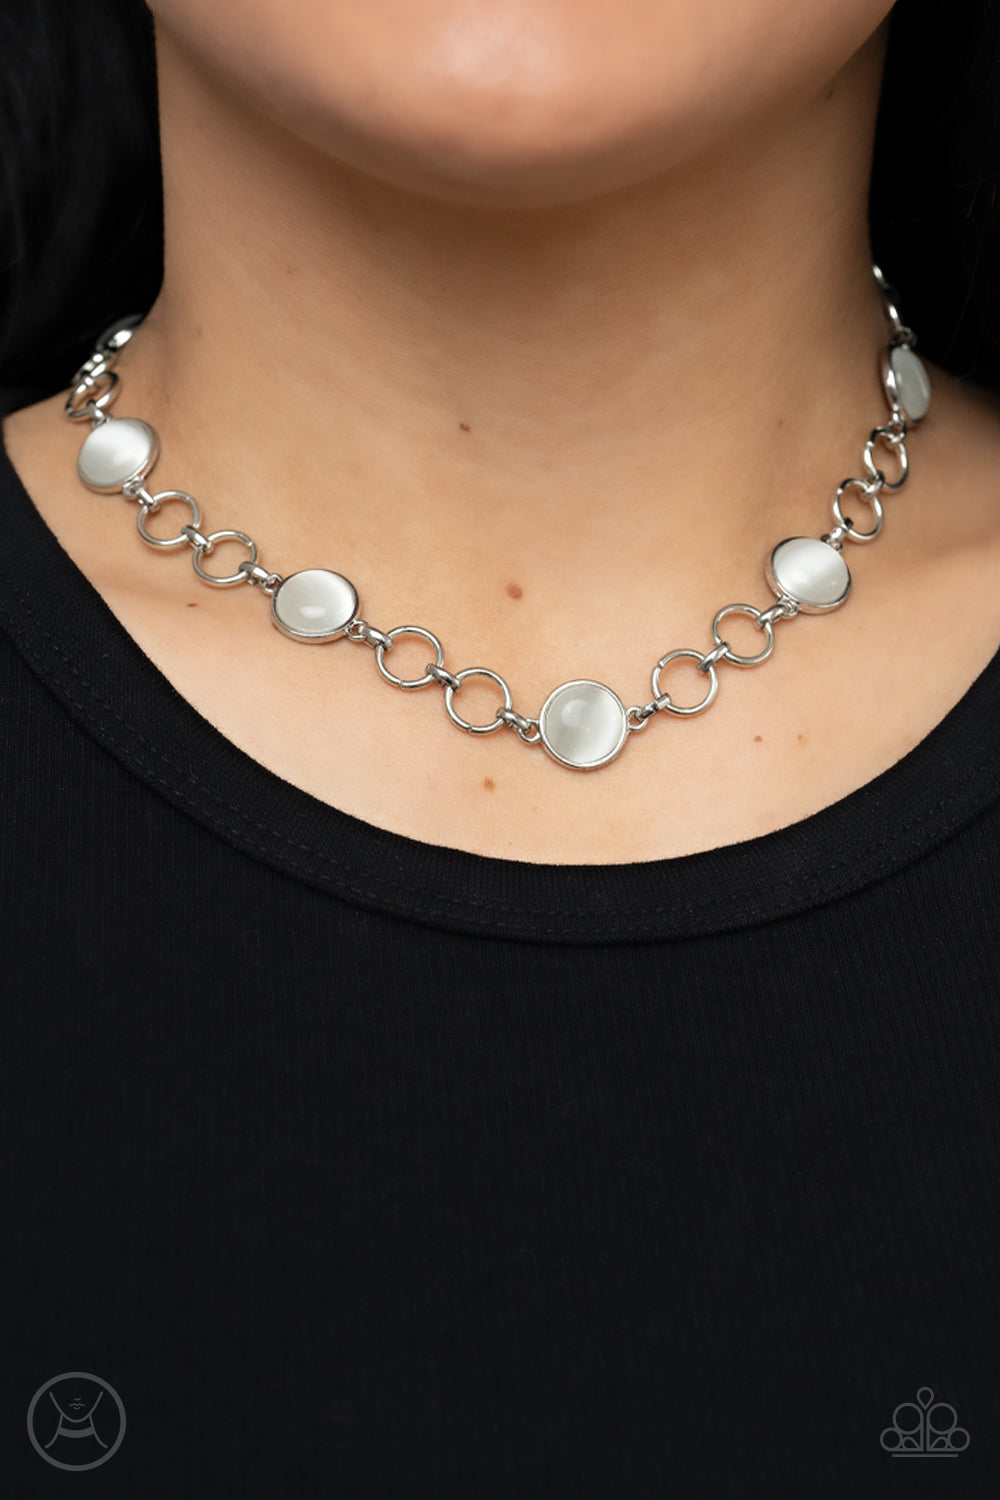 Pairs of silver hoops and white cat's eye dotted silver frames delicately link around the neck, creating a dreamy glow. Features an adjustable clasp closure.  Sold as one individual choker necklace. Includes one pair of matching earrings.